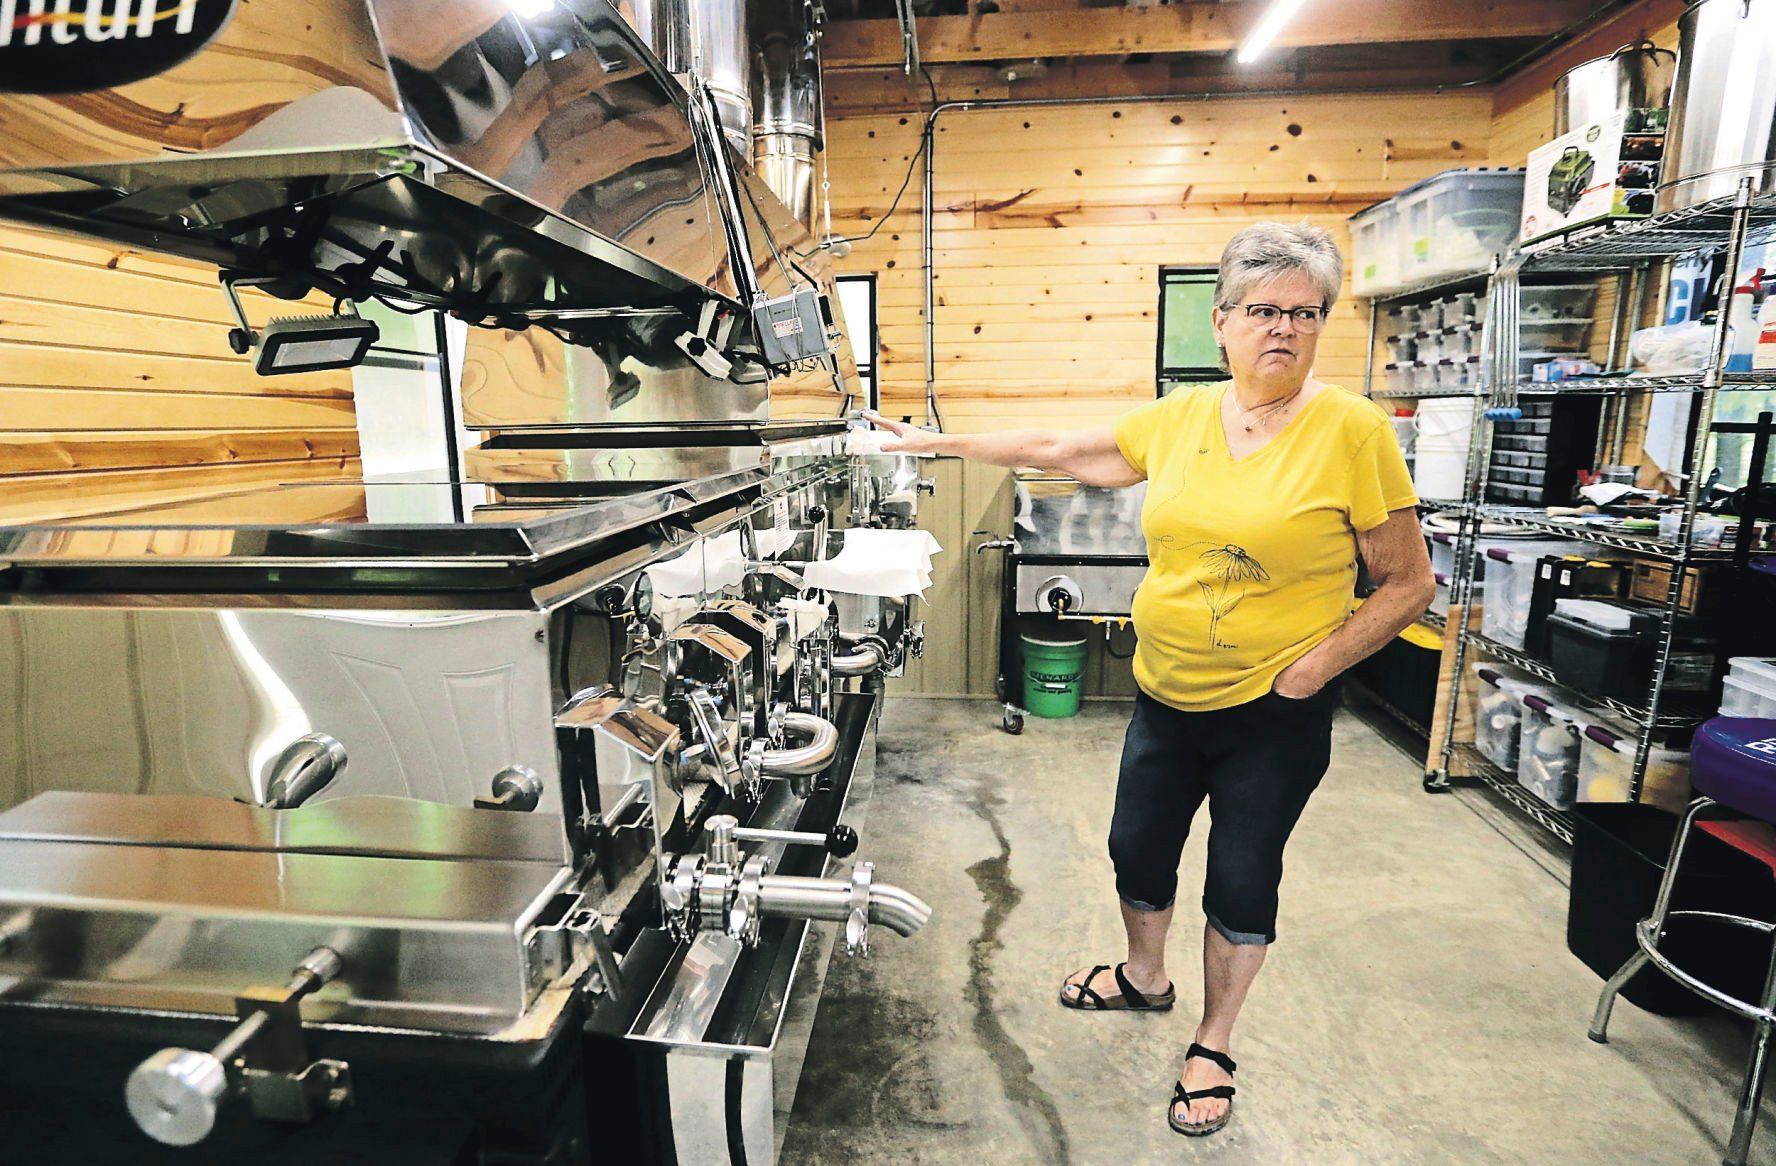 Deb Zenner describes the process of making maple syrup at Timber Range Farm in Durango, Iowa. Deb and her husband started the farm in 2016 and their products are available at many area markets.    PHOTO CREDIT: JESSICA REILLY